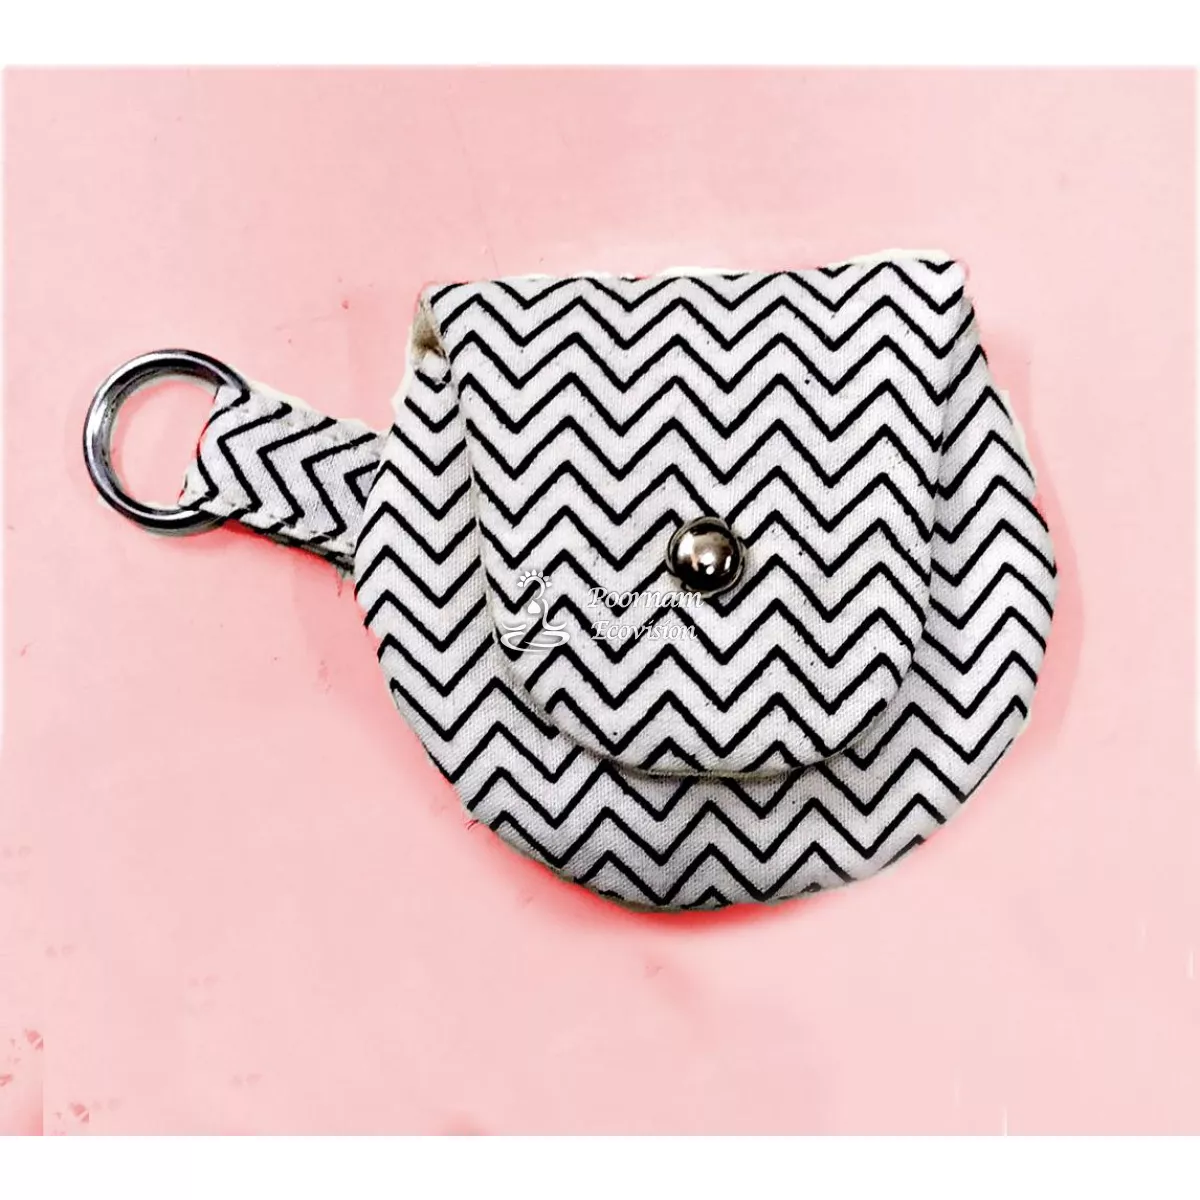 Buy Oyachic Coin Pouch Card Canvas Purse Clasp Closure Classic Rose Pattern  Keys Wallet Gift Round (Black) at Amazon.in